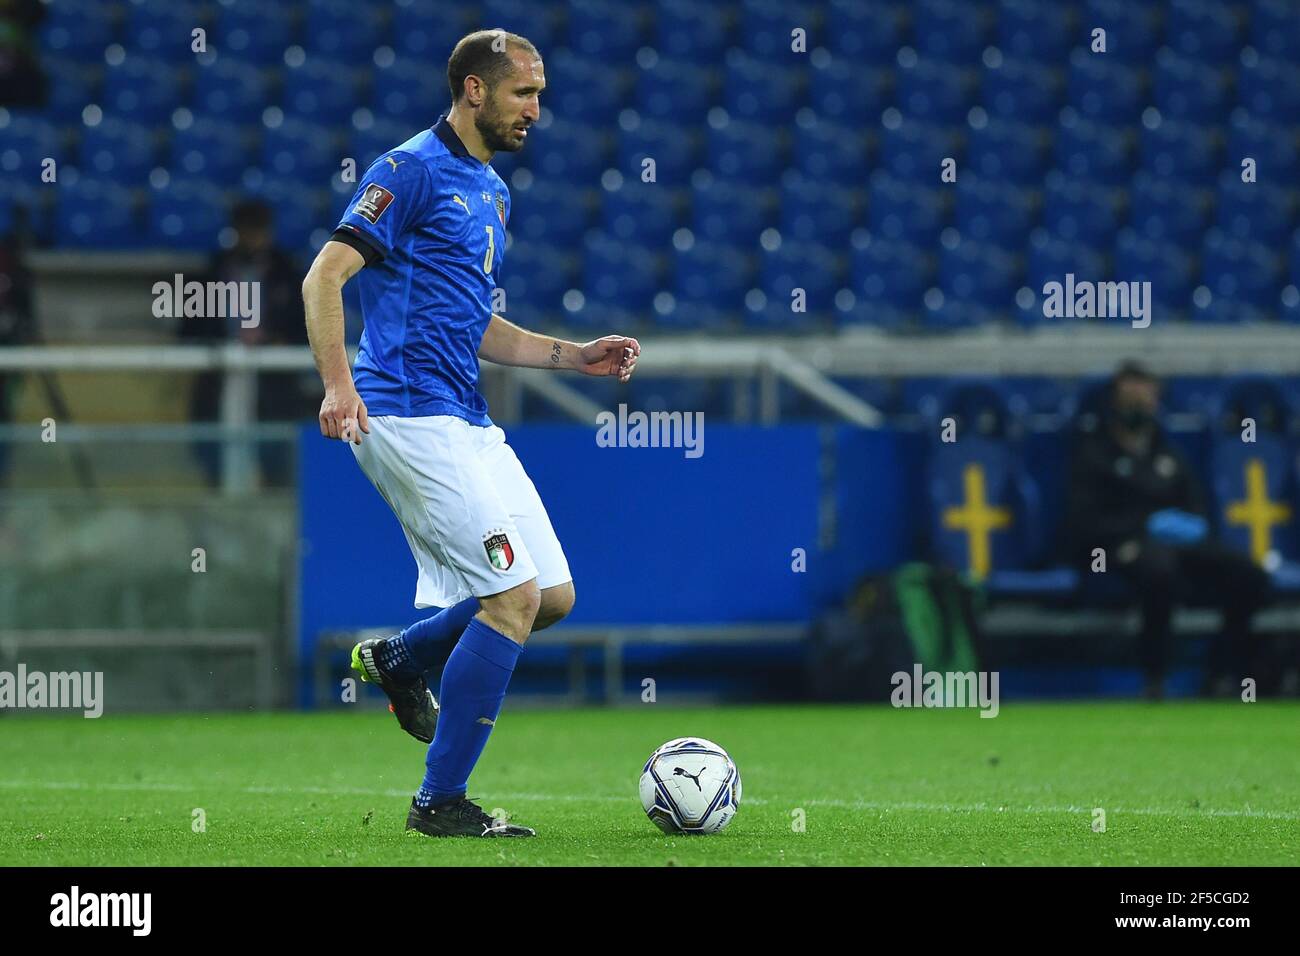 Parma, Emilia Romagna. 25th Mar, 2021. Giorgio Chiellini of Italy in action during the Qualification Fifa World Cup 2022 soccer match Italy vs North Ireland in the Ennio Tardini stadium in Parma, Italy, 25 March 2021. Fotografo01 Credit: Independent Photo Agency/Alamy Live News Stock Photo